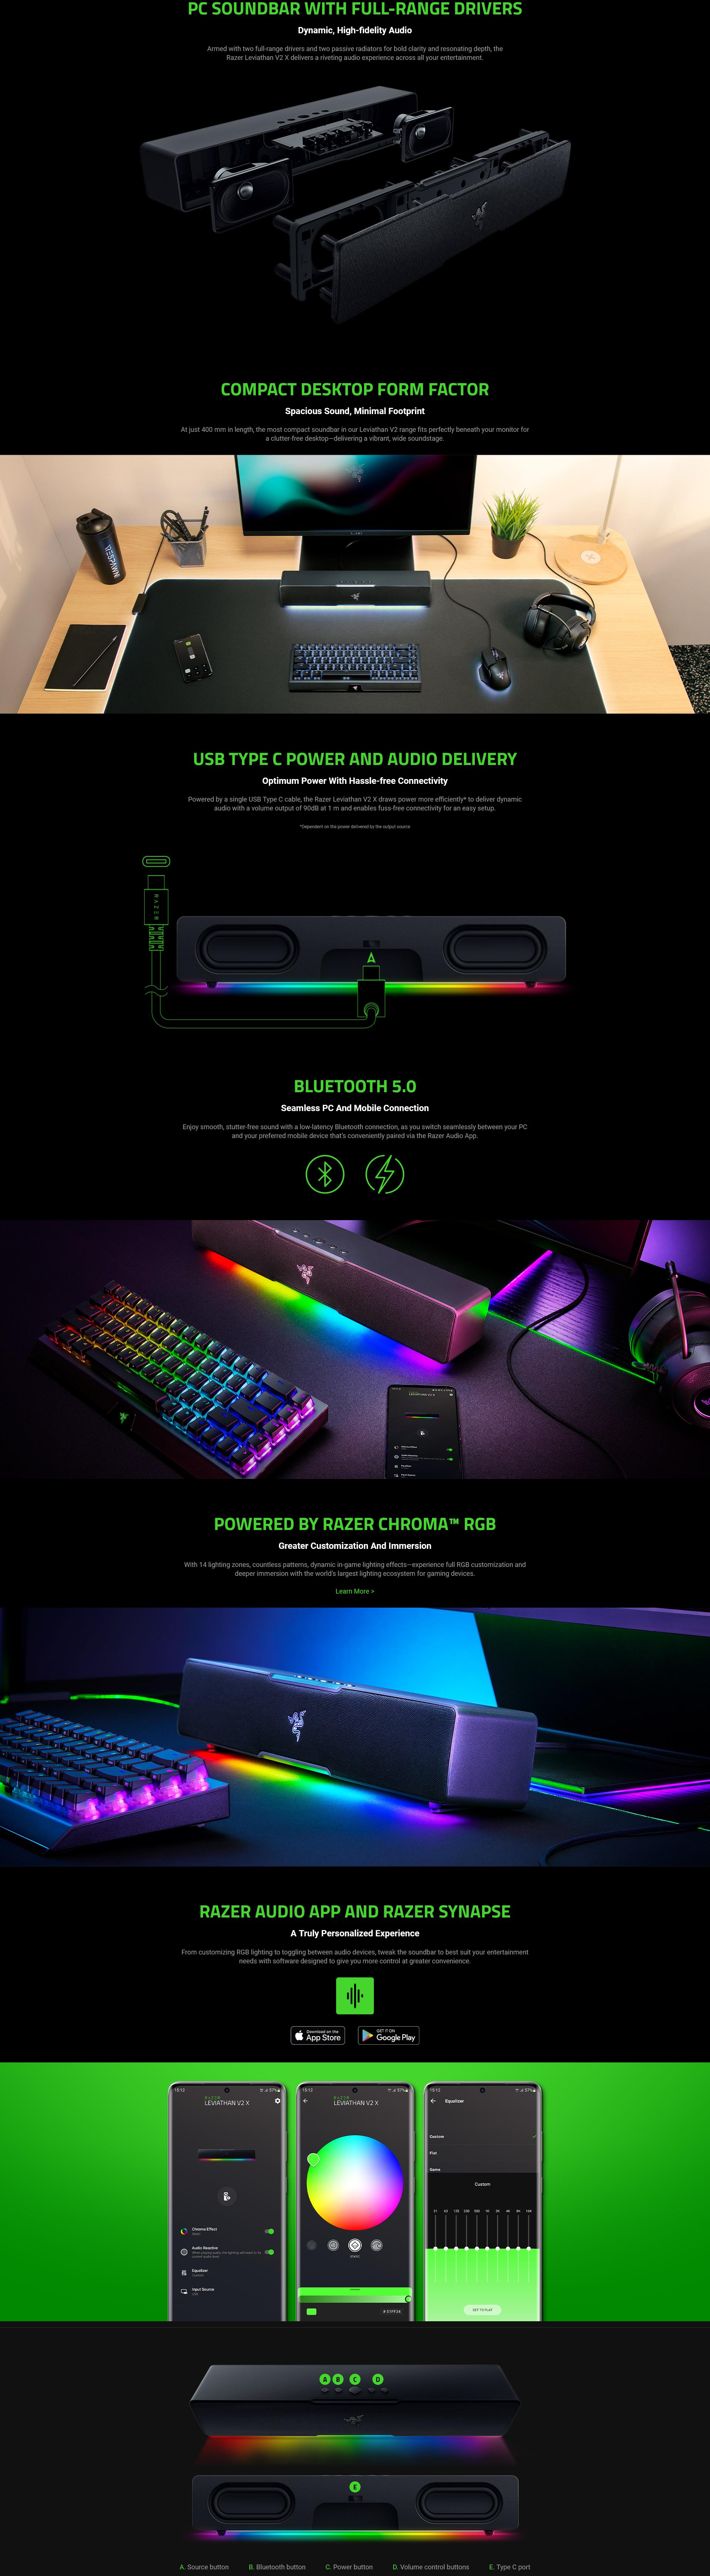 A large marketing image providing additional information about the product Razer Leviathan V2 X - Gaming Sound Bar for PC - Additional alt info not provided